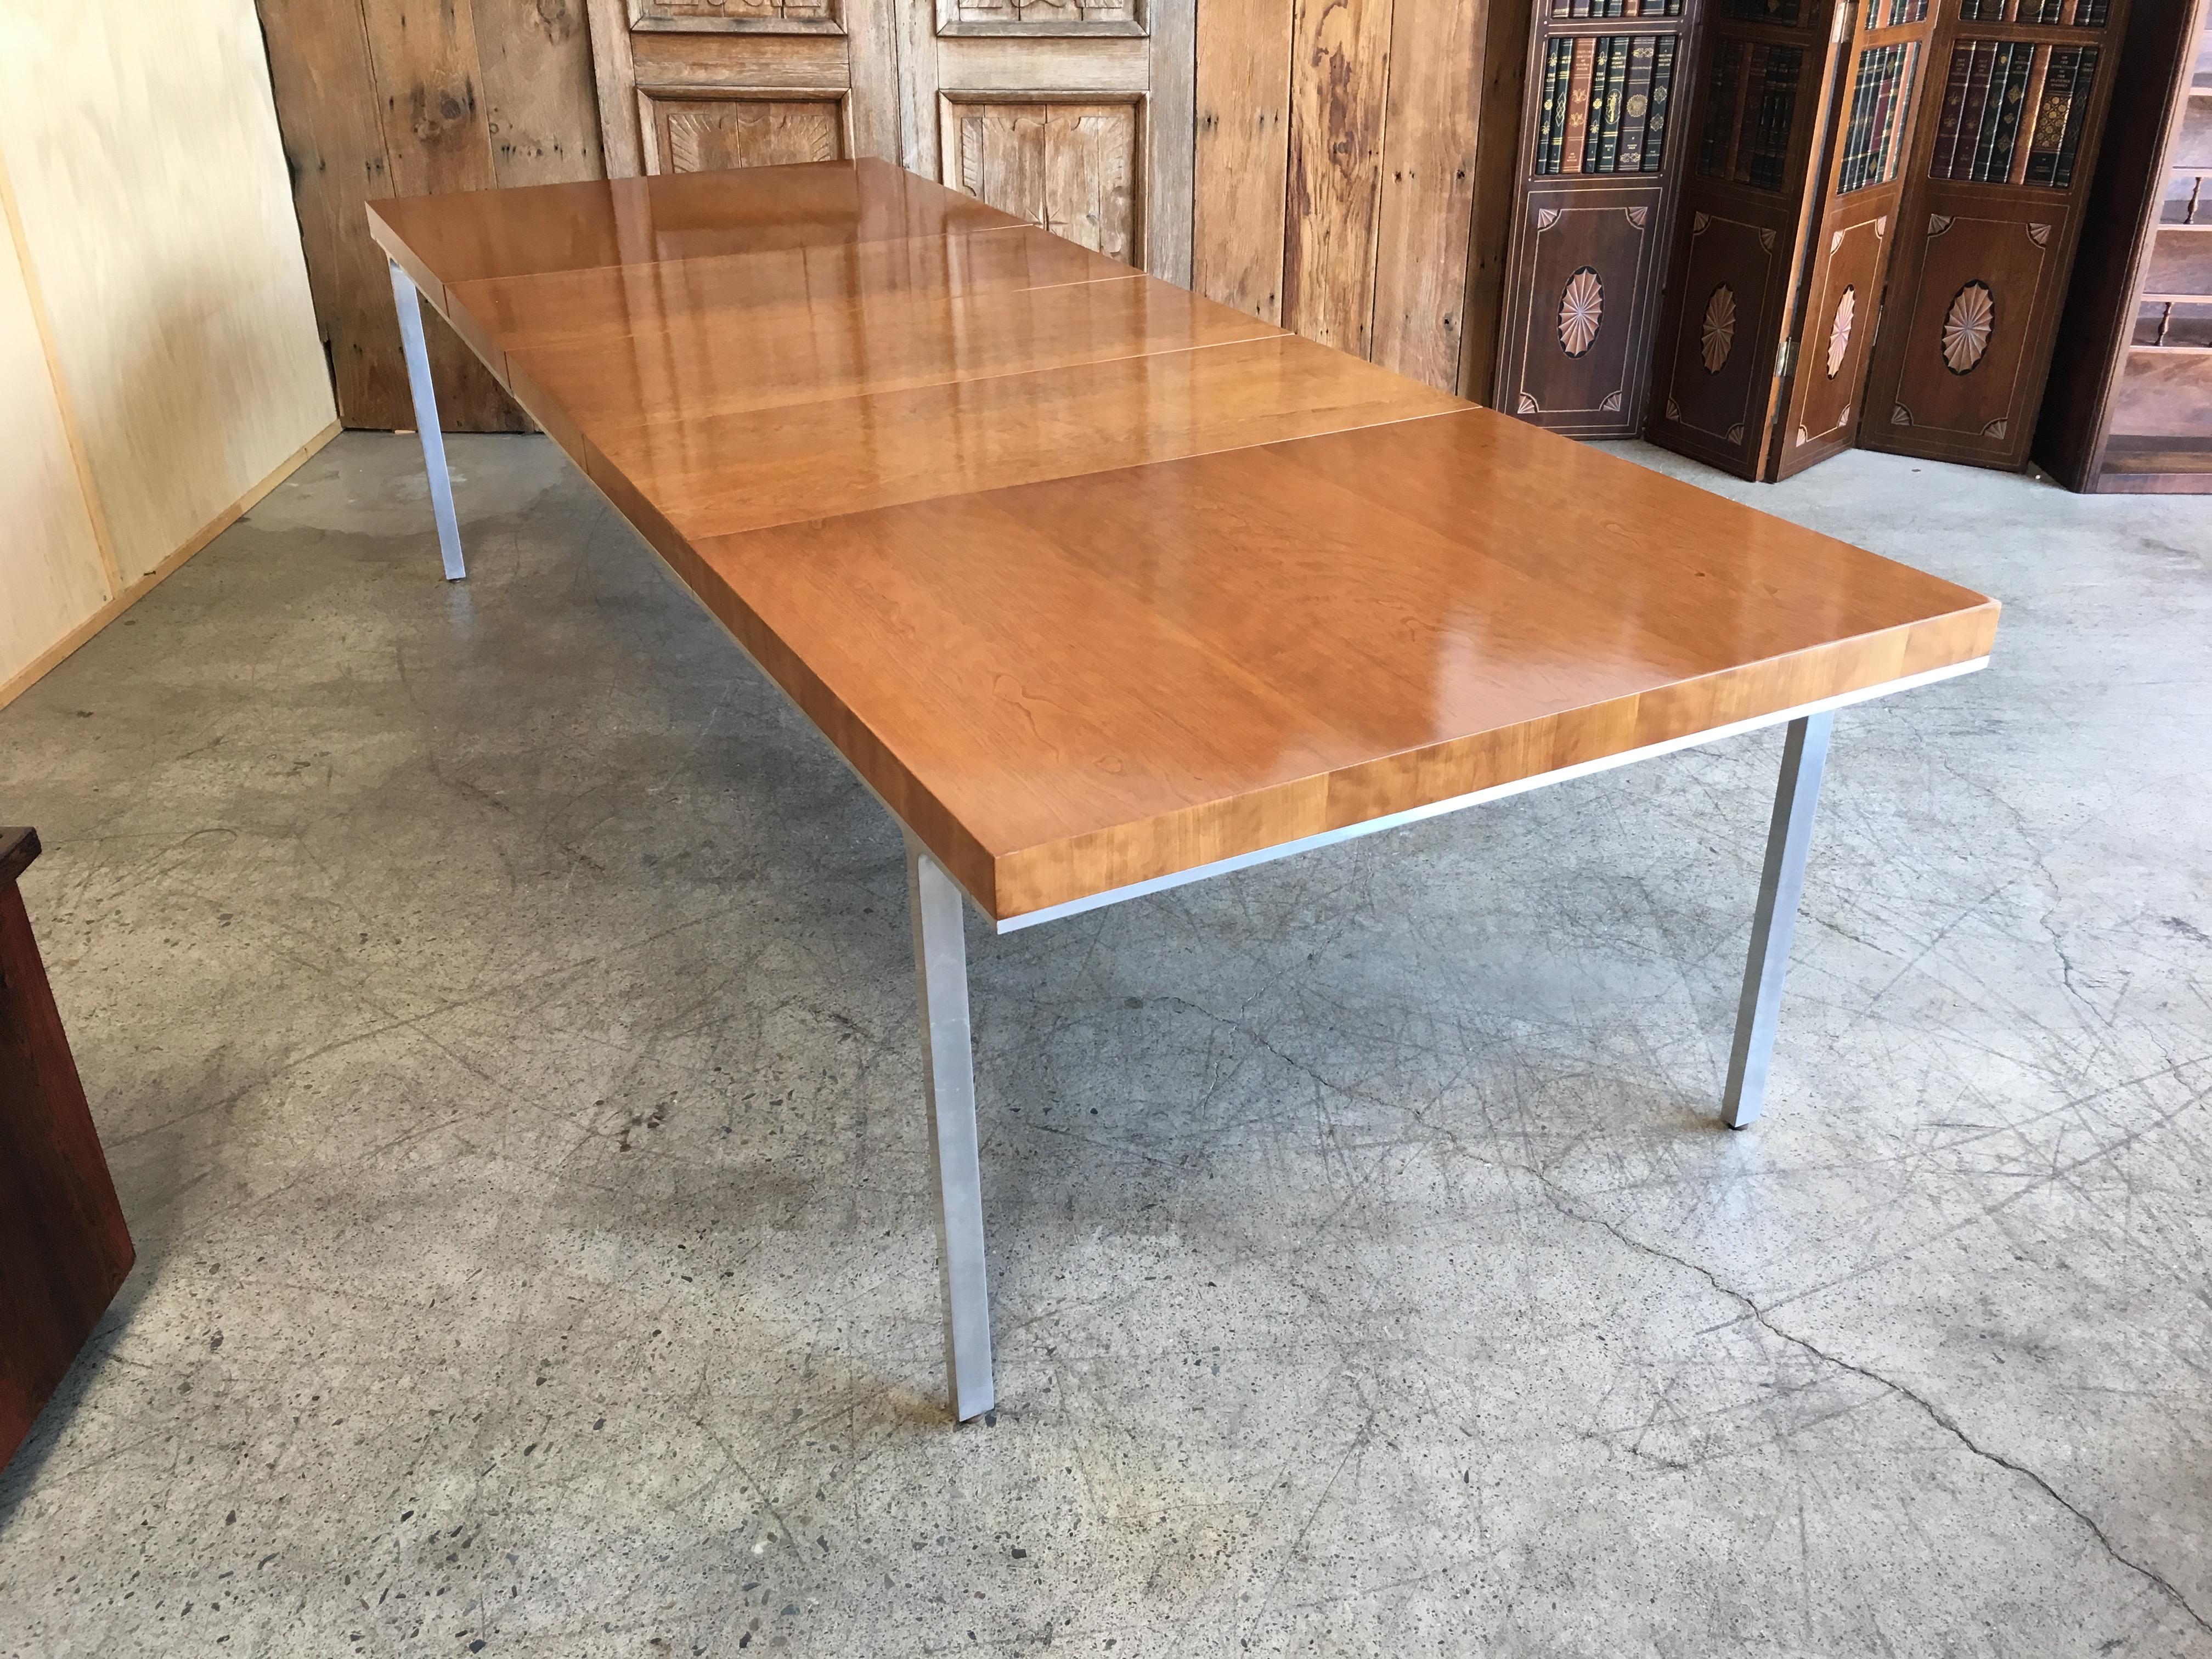 Very versatile table with the combination of wood and aluminum legs and apron 
This massive table was refinished not to long ago in a light walnut finish 
 There are three leaves, each one measures 18 inches. Length without the Leaves is 63.5.